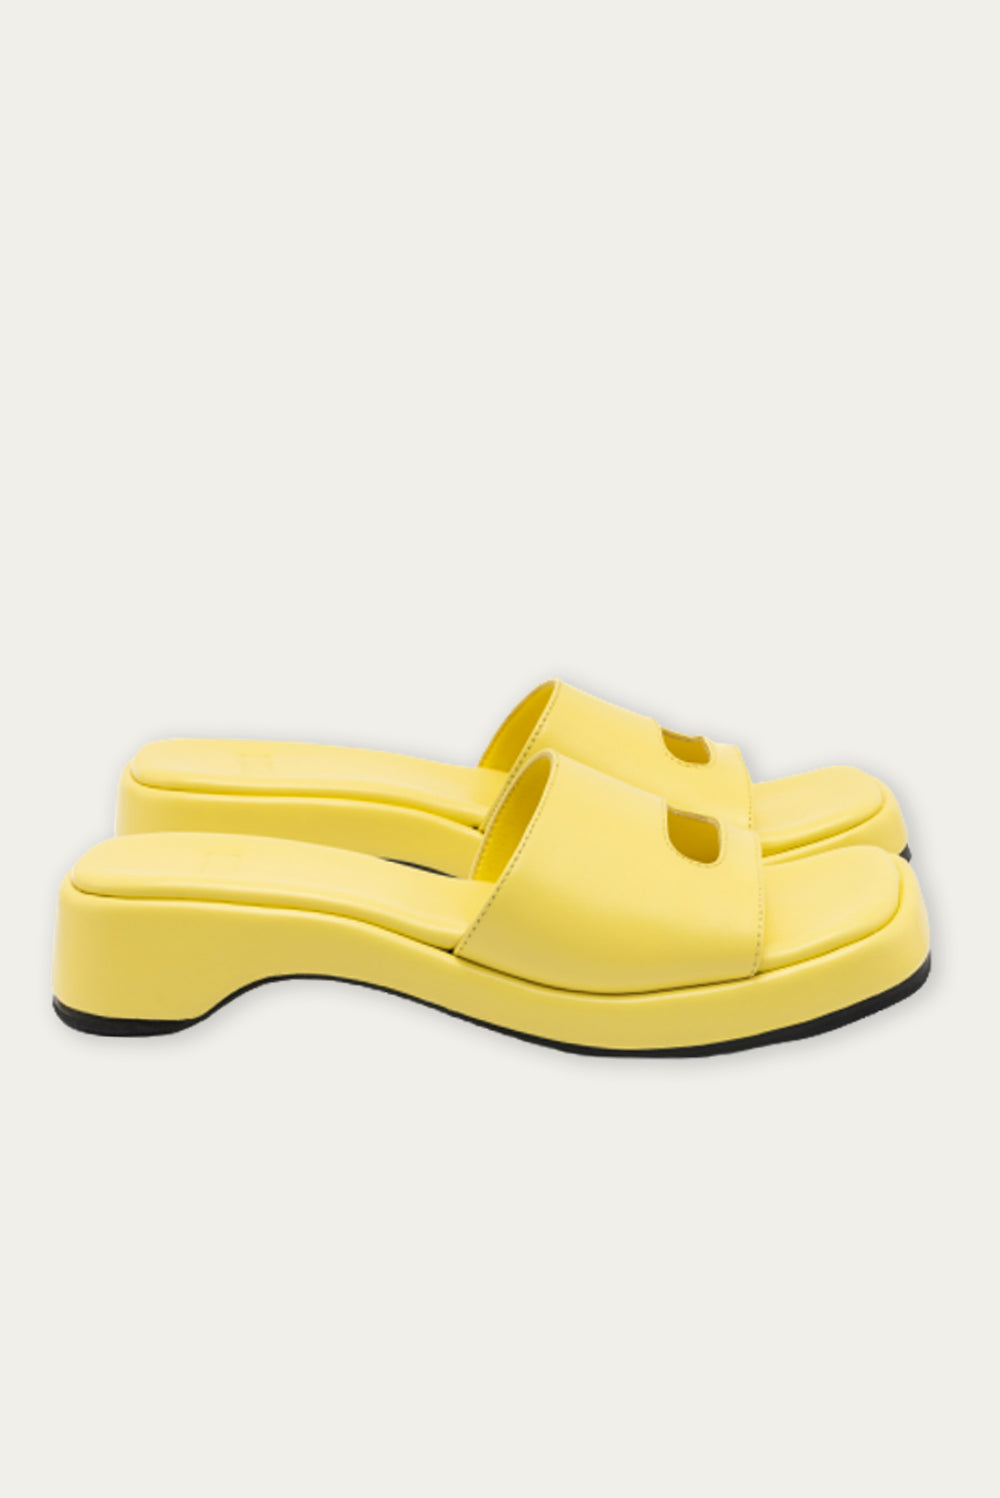 The Yellow Leather Mule